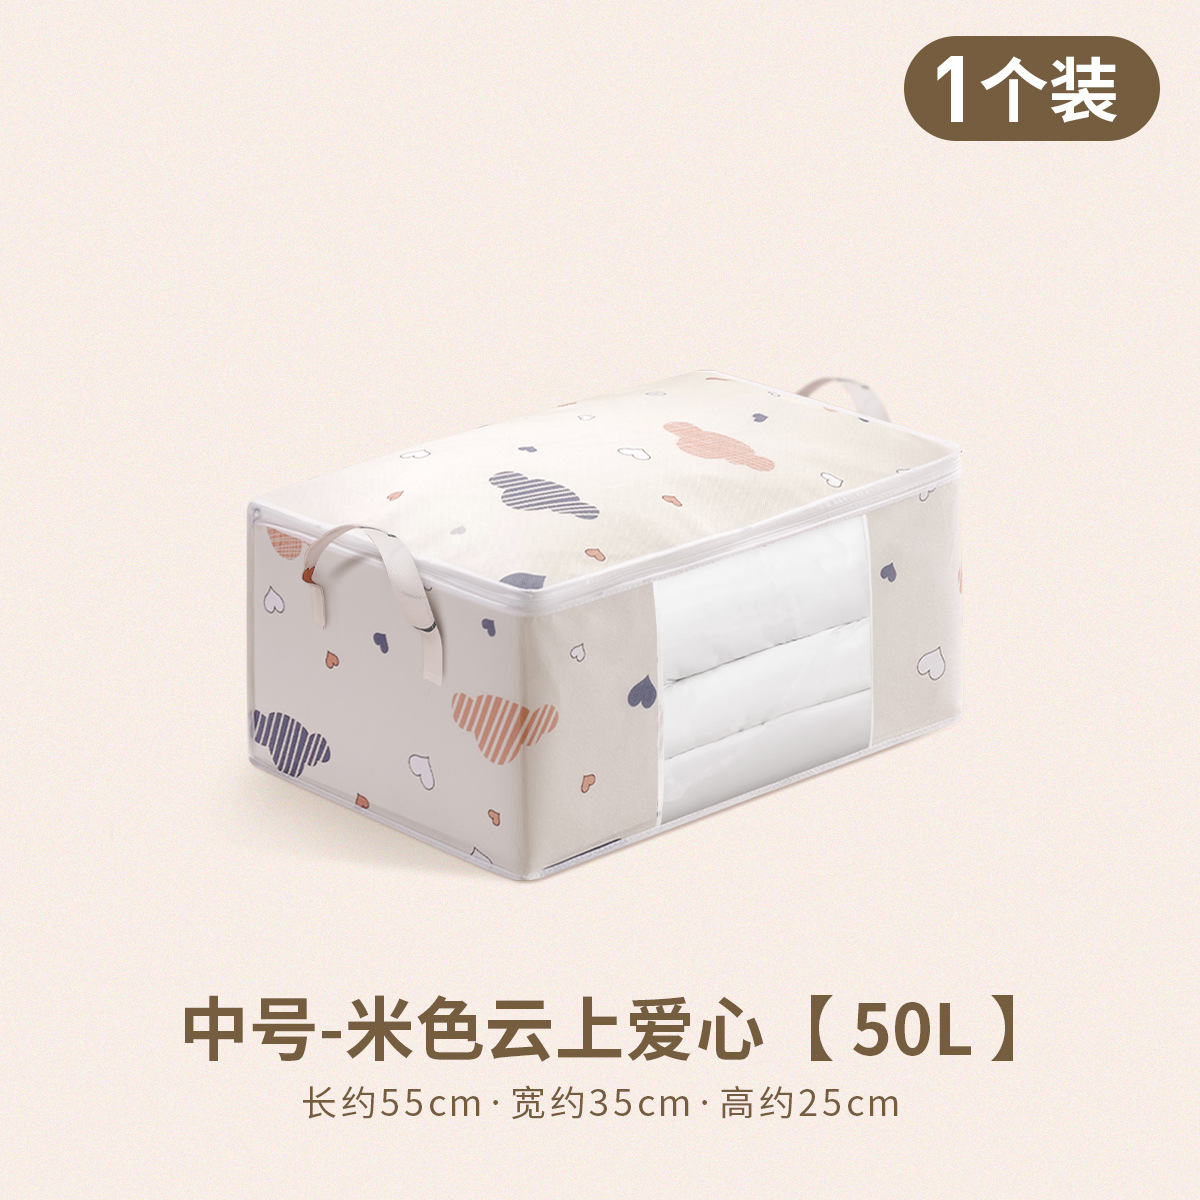 Quilt Storage Bag with Handle Quilt Bag Multi-Functional Dust Bag Household Moving Packing Bag Organizing Bag Storage Box